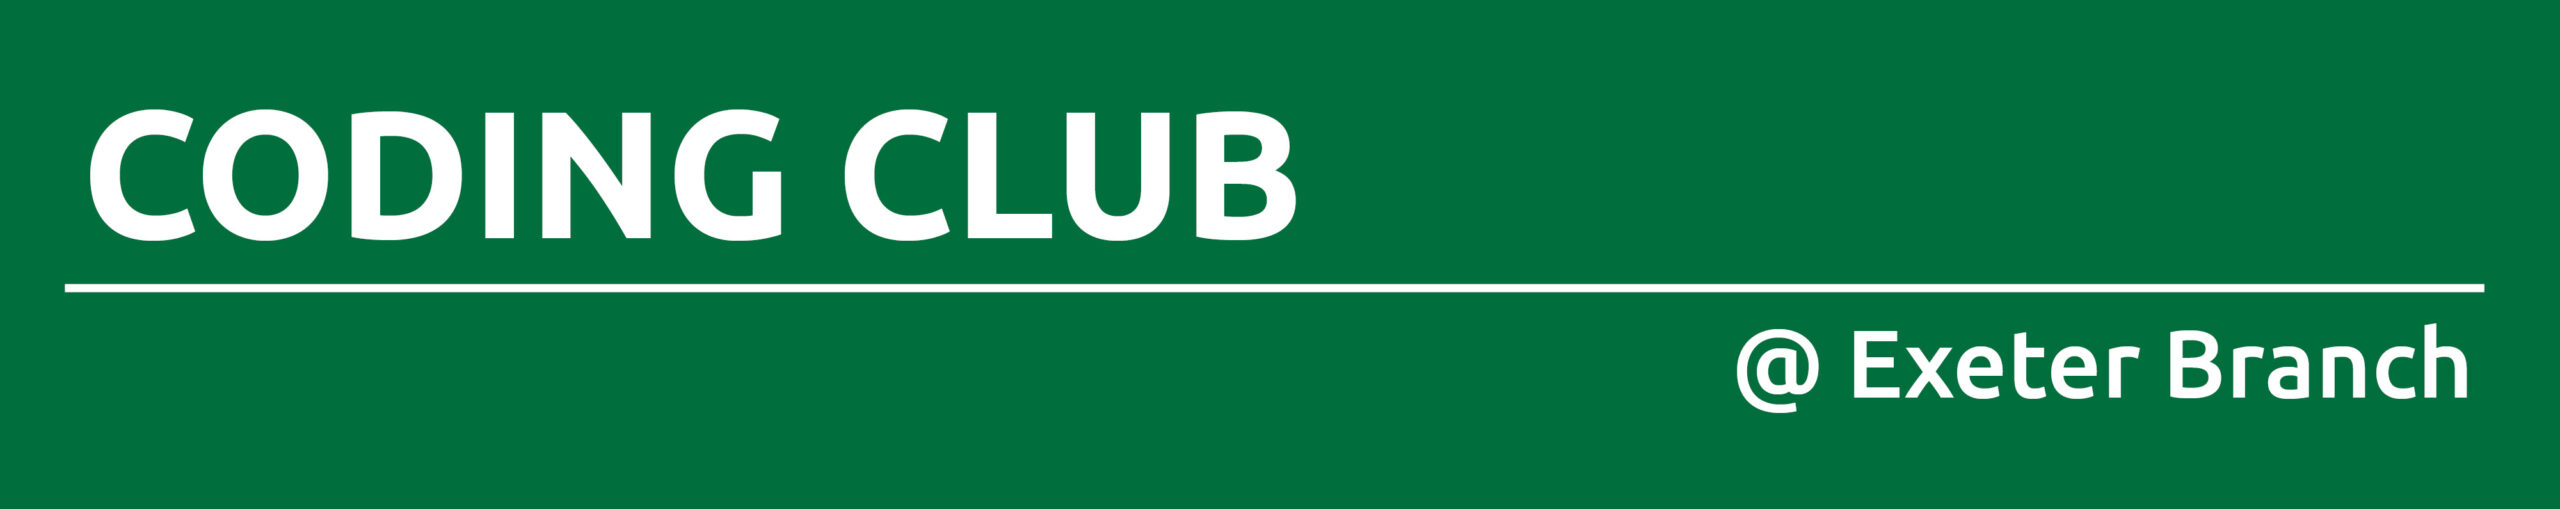 Dark green box with text promoting Coding Club at Exeter